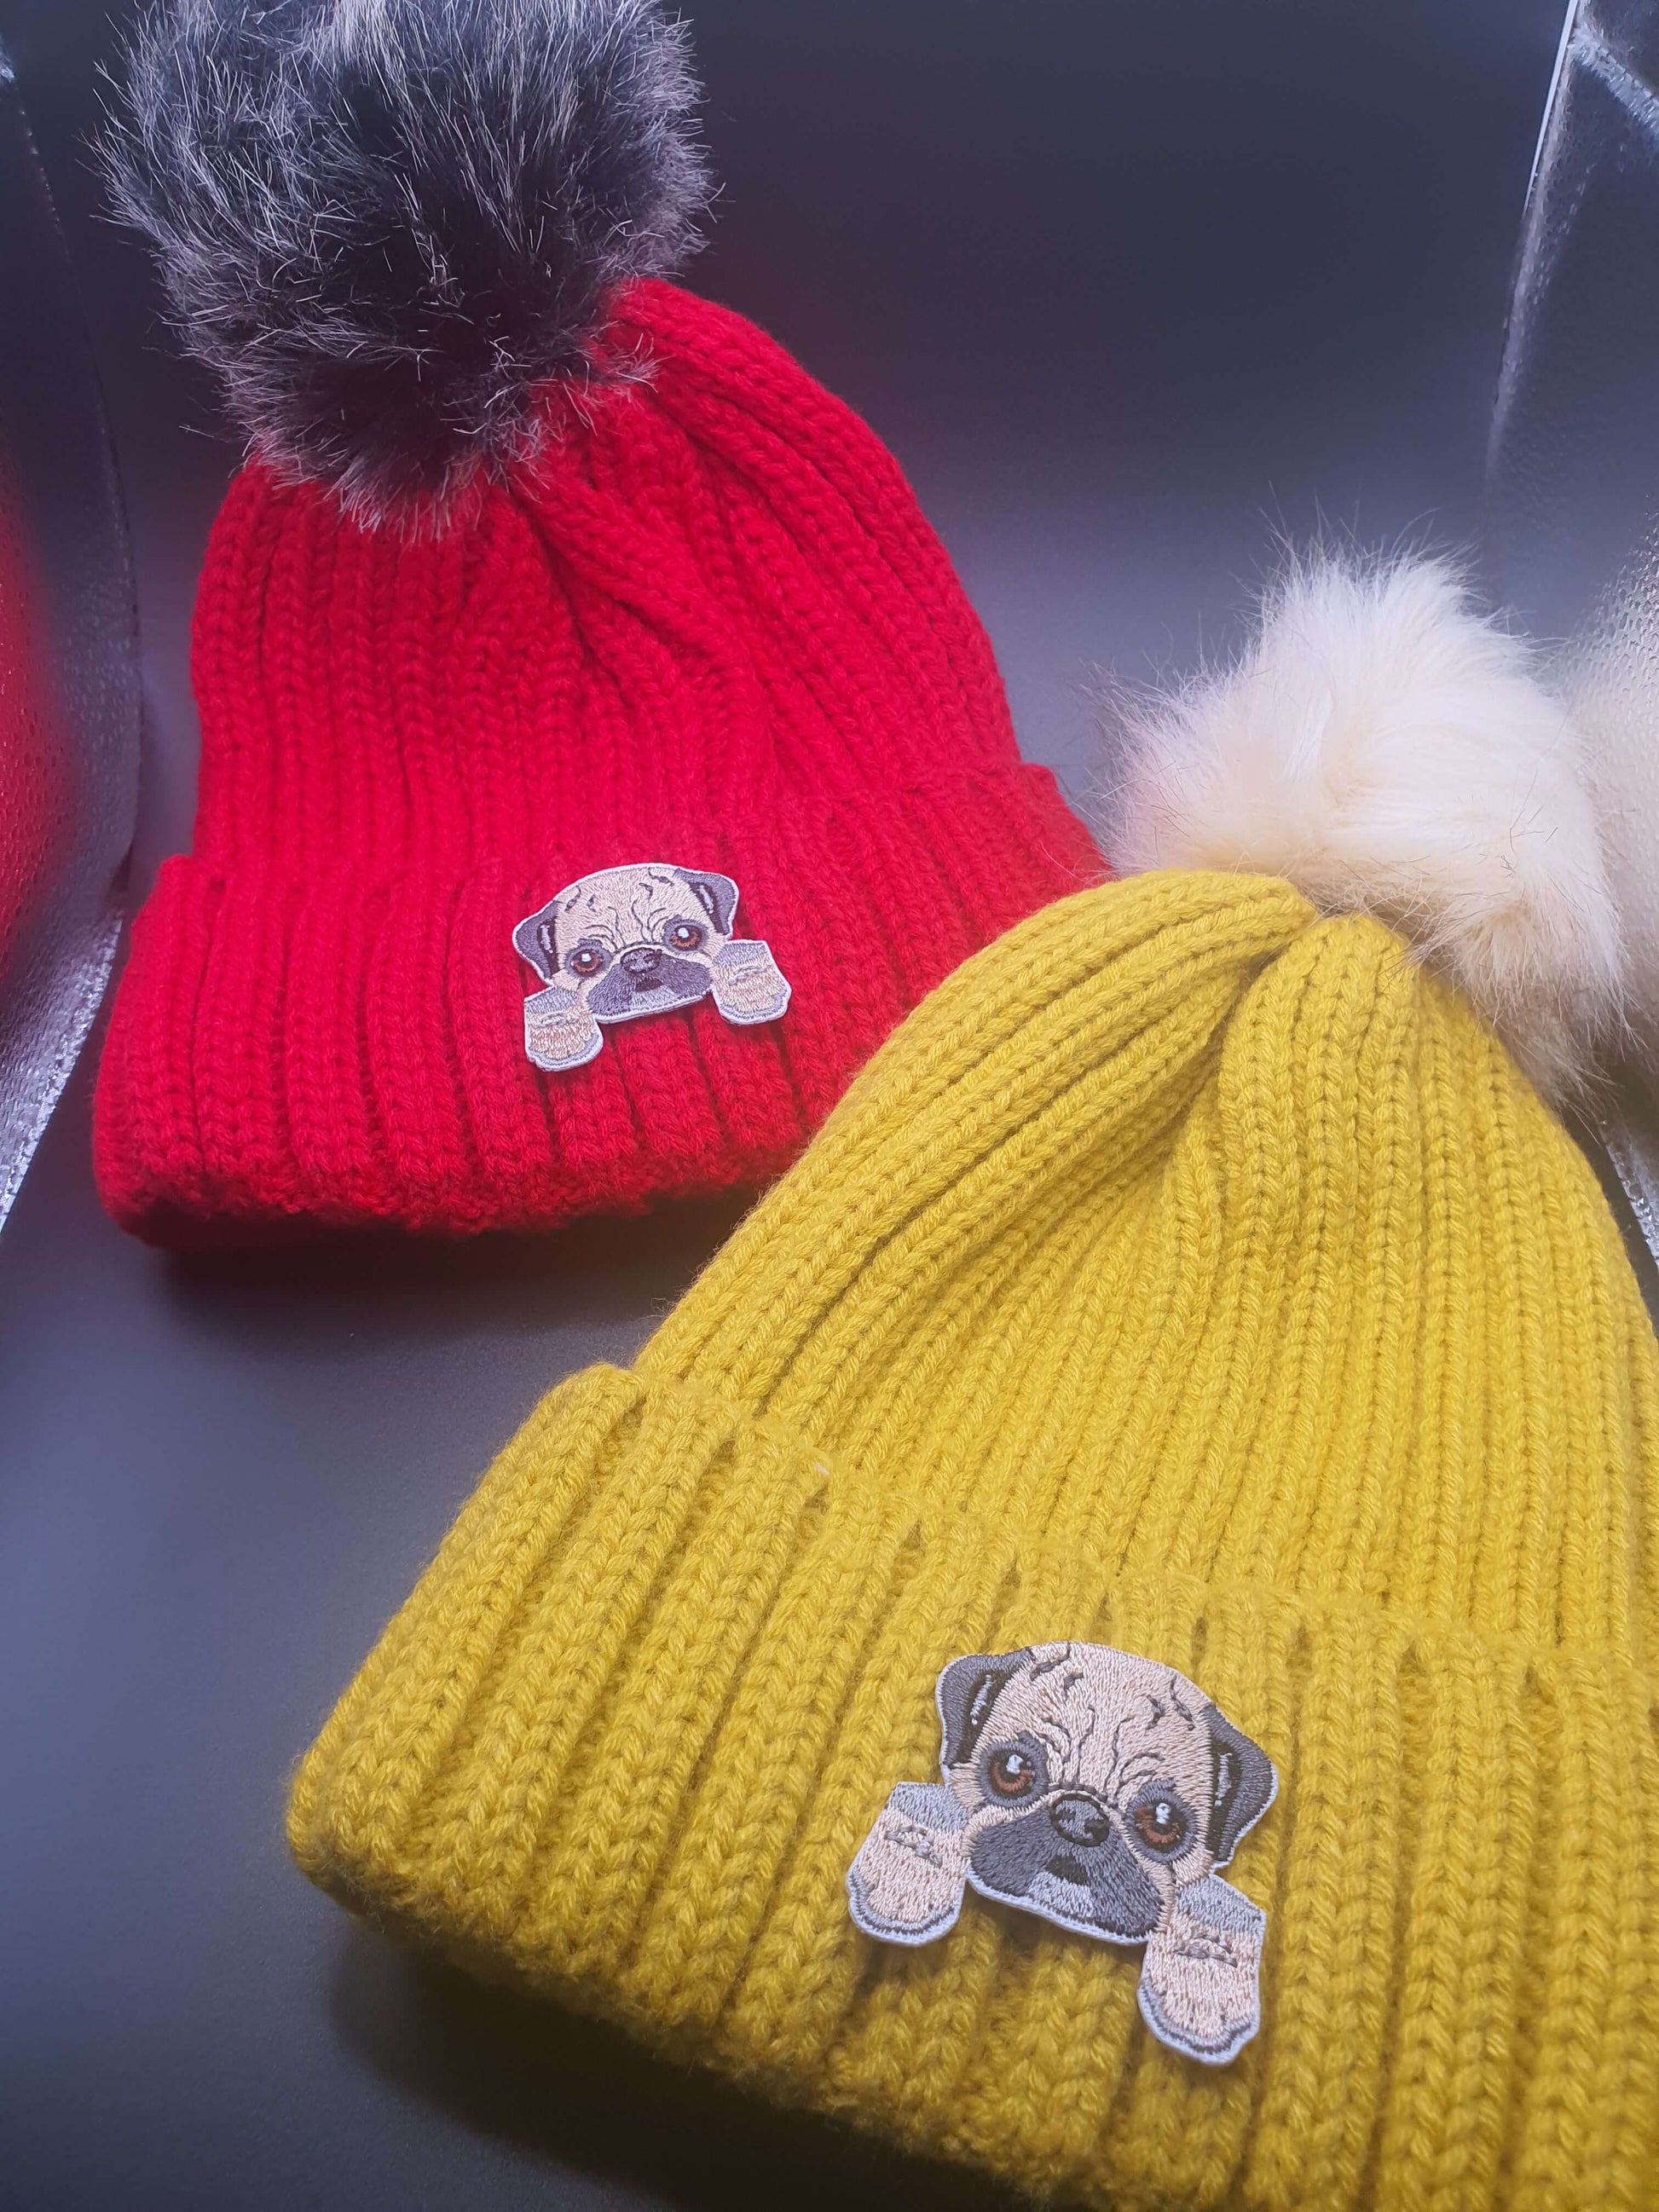 Dog Themed Knitted Beanies - Style's Bug Pug / Both (25% OFF)